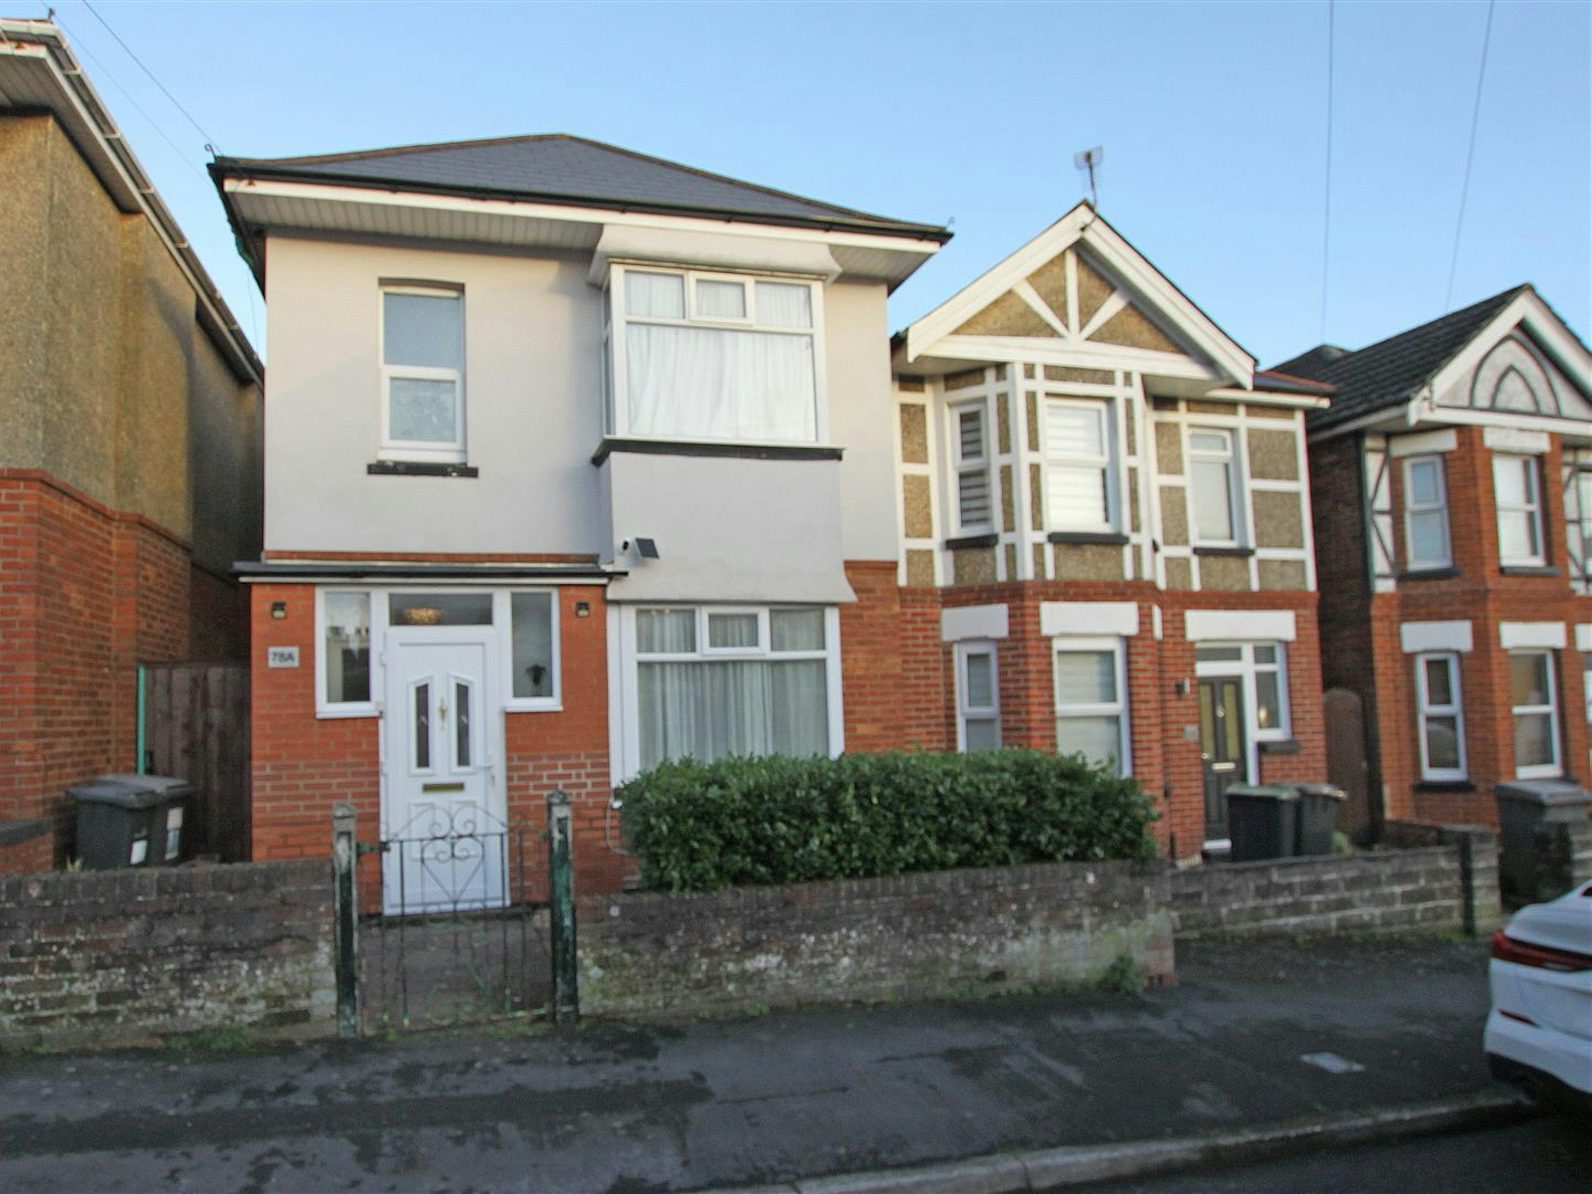 Detached house for sale on Malvern Road Bournemouth, BH9